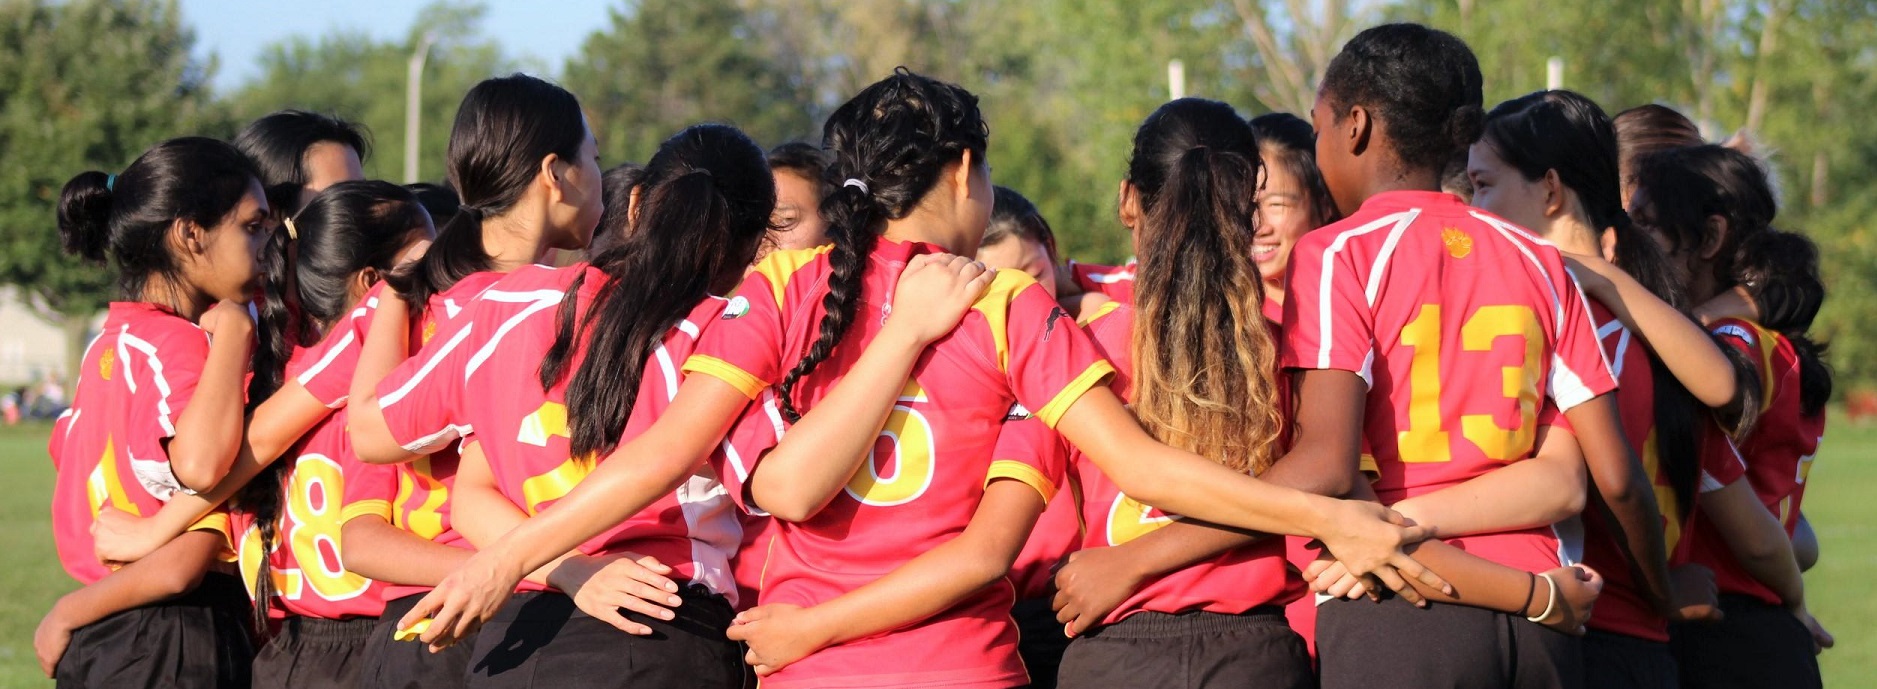 Huddle_rugby